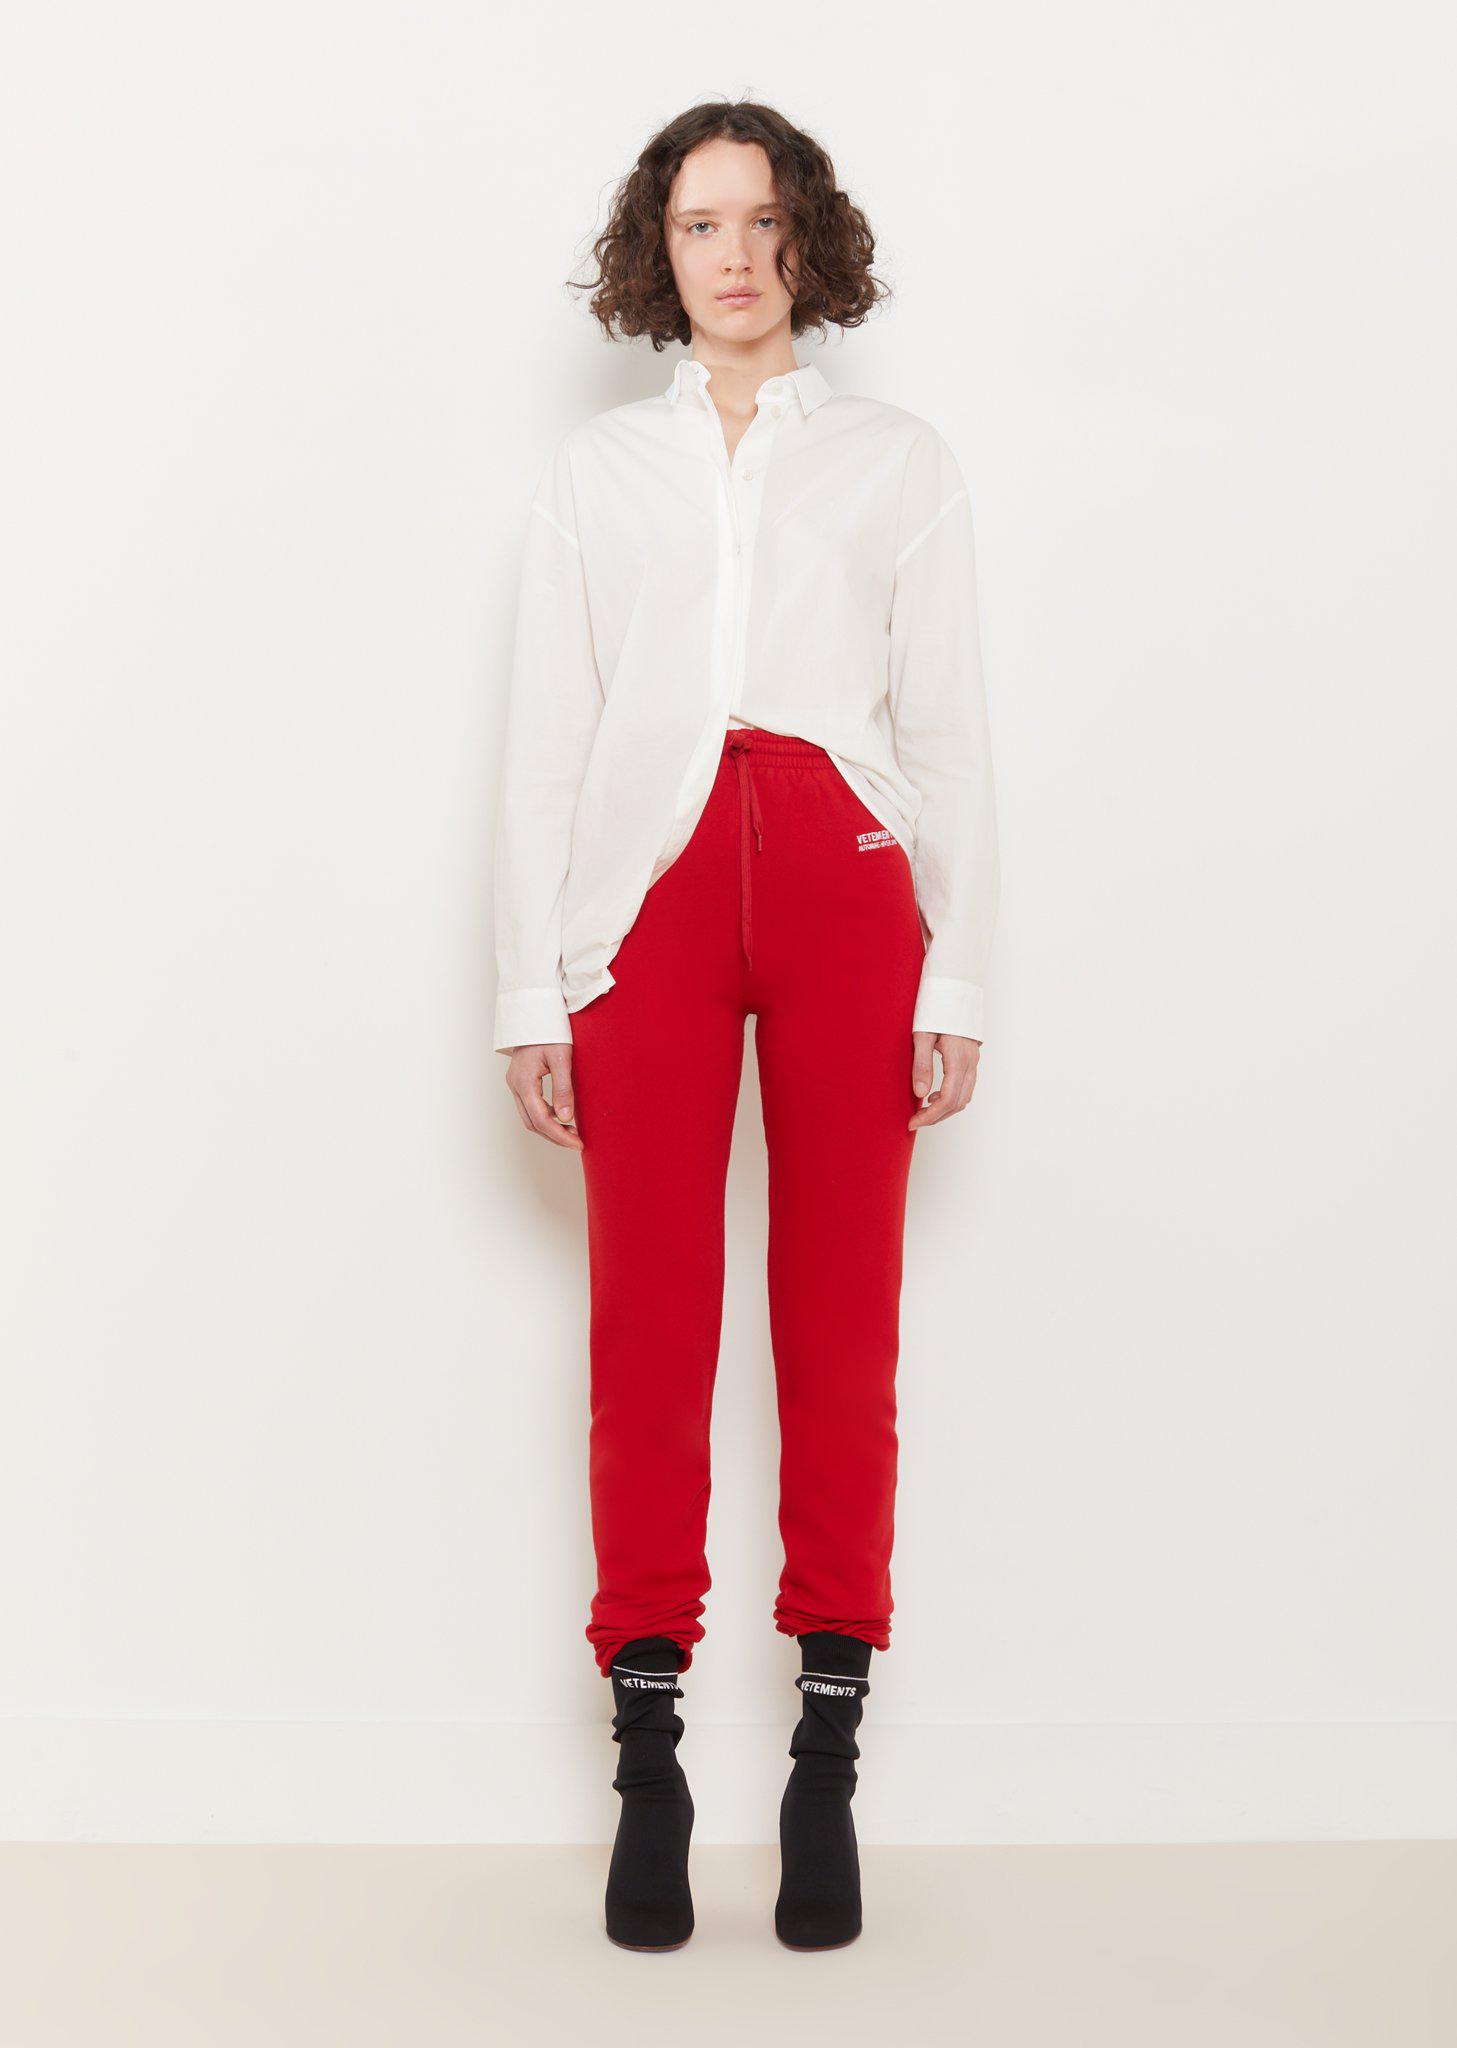 Lyst - Vetements Fitted Jogging Pants in Red